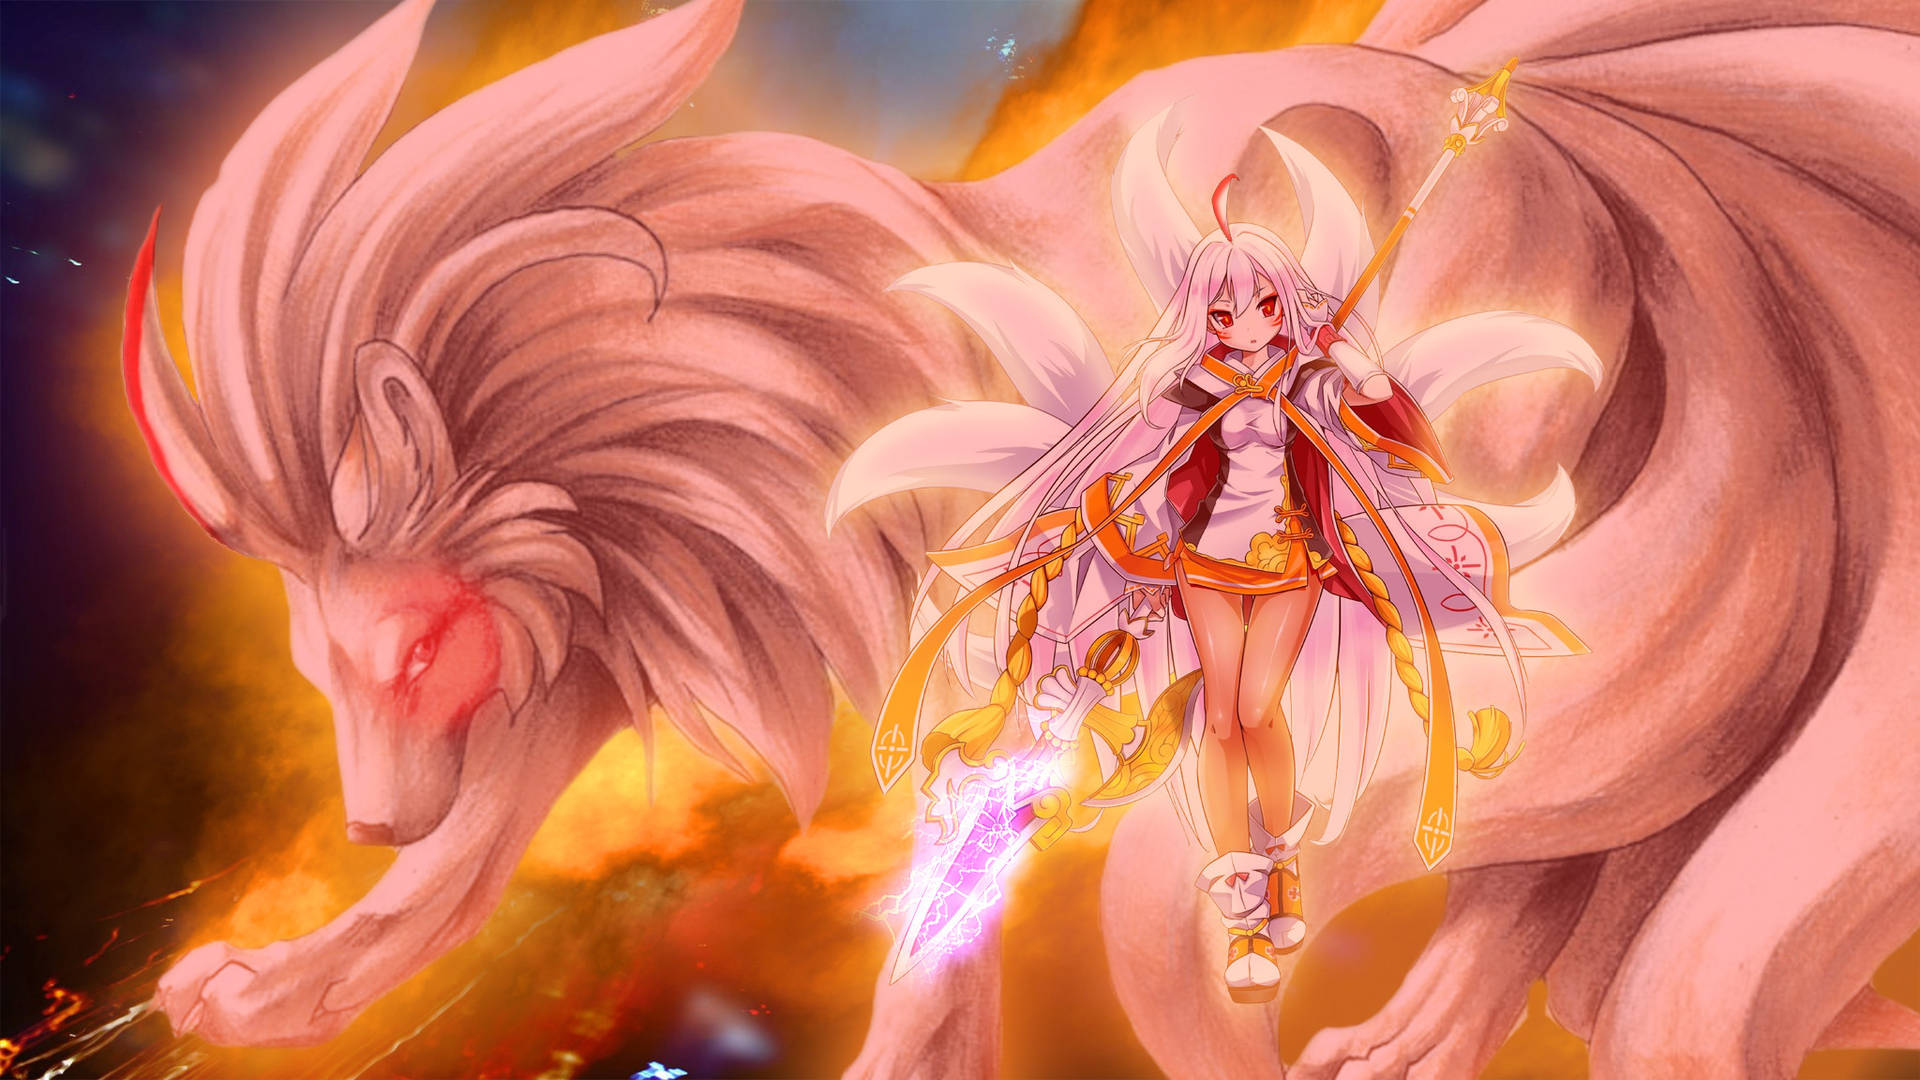 Mysterious Nine-tailed Fox In Human Form Background